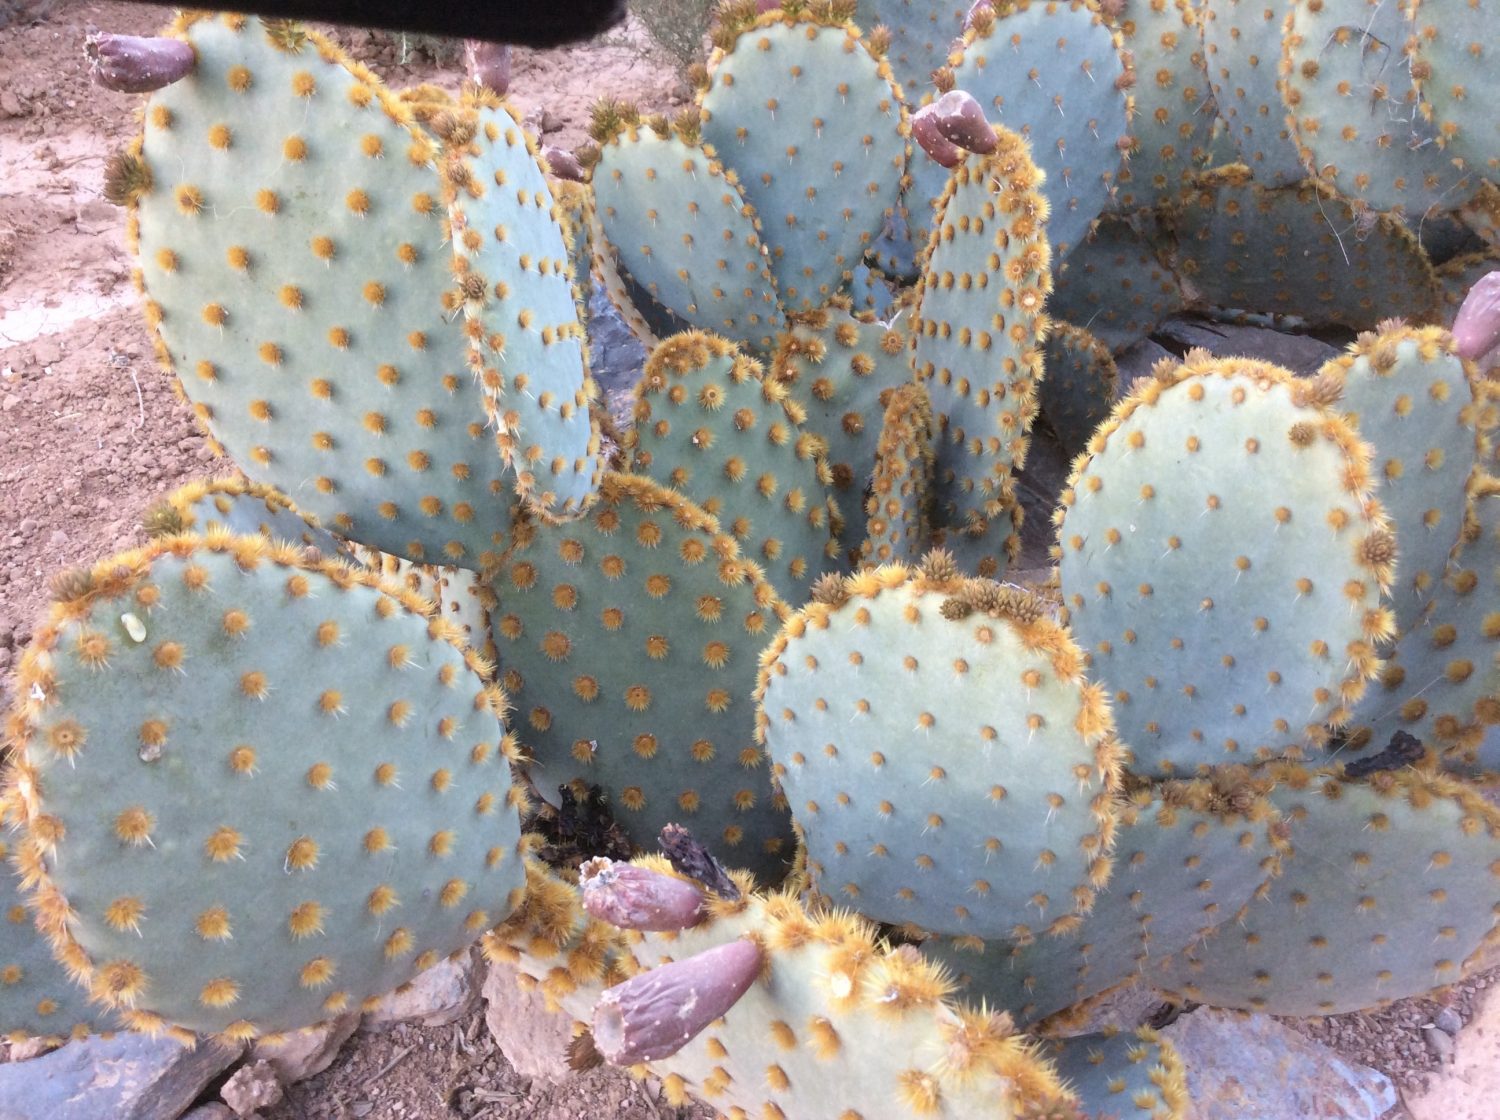 Cactus are the perfect plants for the young who tend to be out a lot or perhaps live in flats without access to gardens, as they require little care and are almost impossible to kill